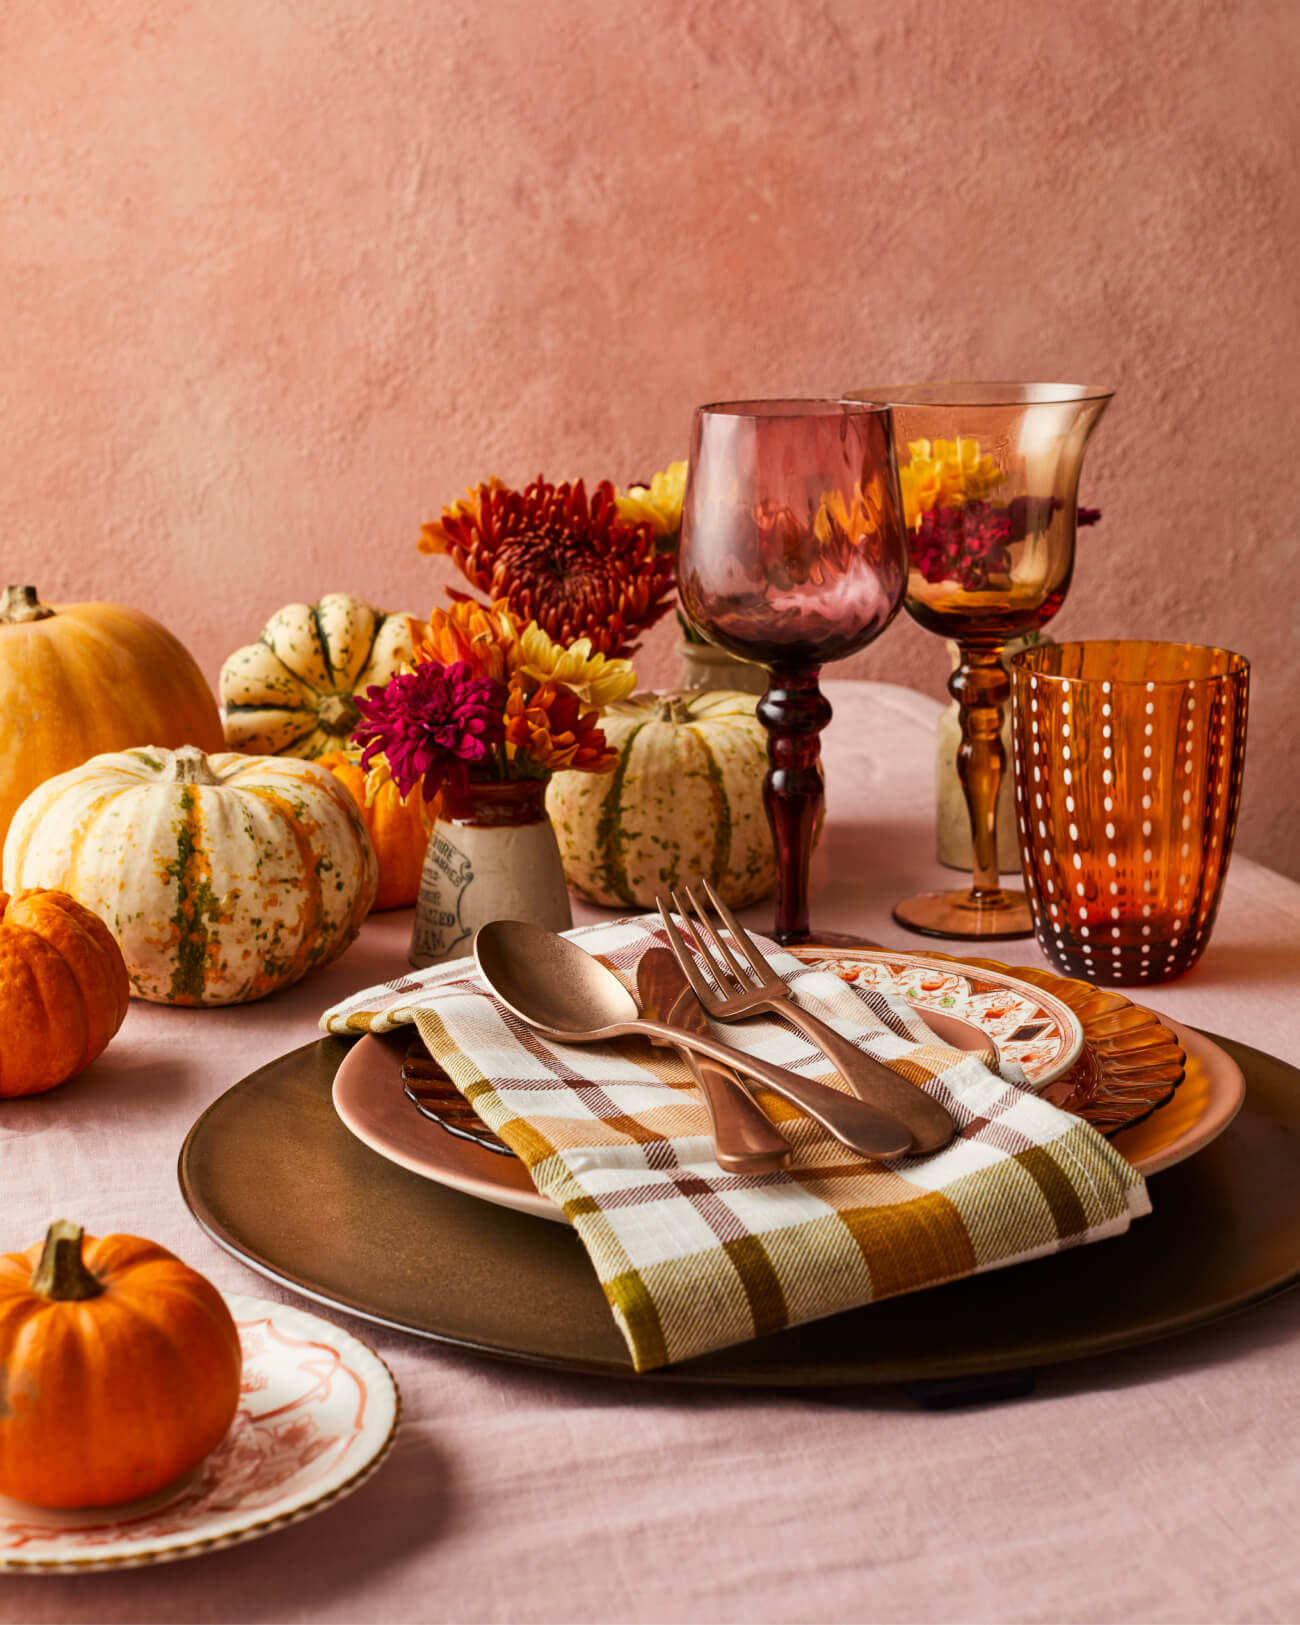 Thanksgiving place settings with mixed vintage and modern crockery and glassware with in pinks, browns, oranges and reds from The Social Kitchen